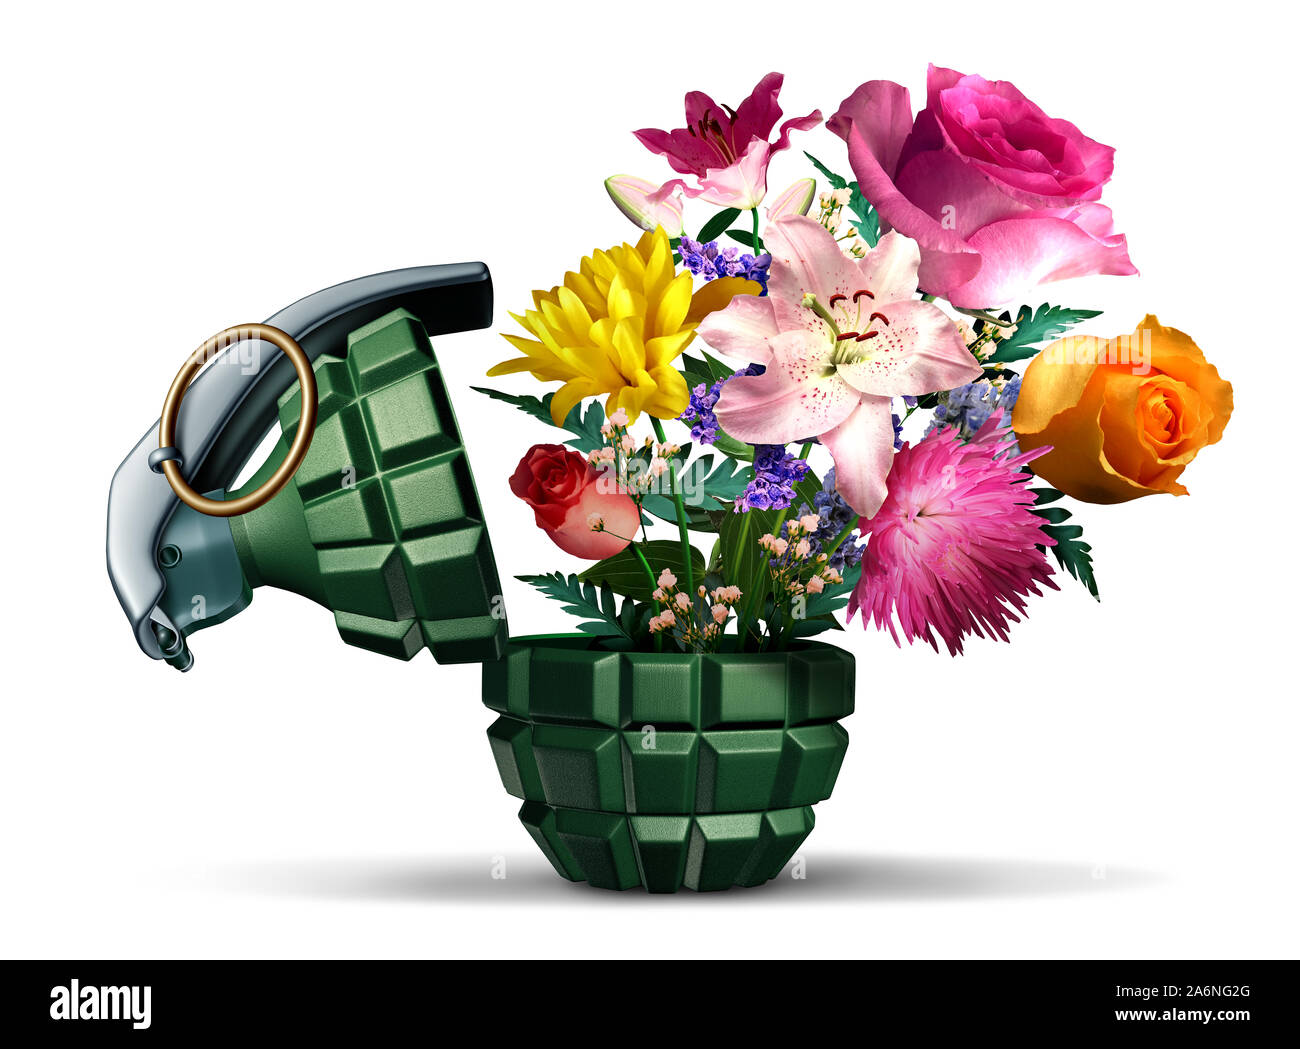 Grenade weapon and flowers as a symbol for terror or war and peace on a white background as an unexploded bomb object. Stock Photo